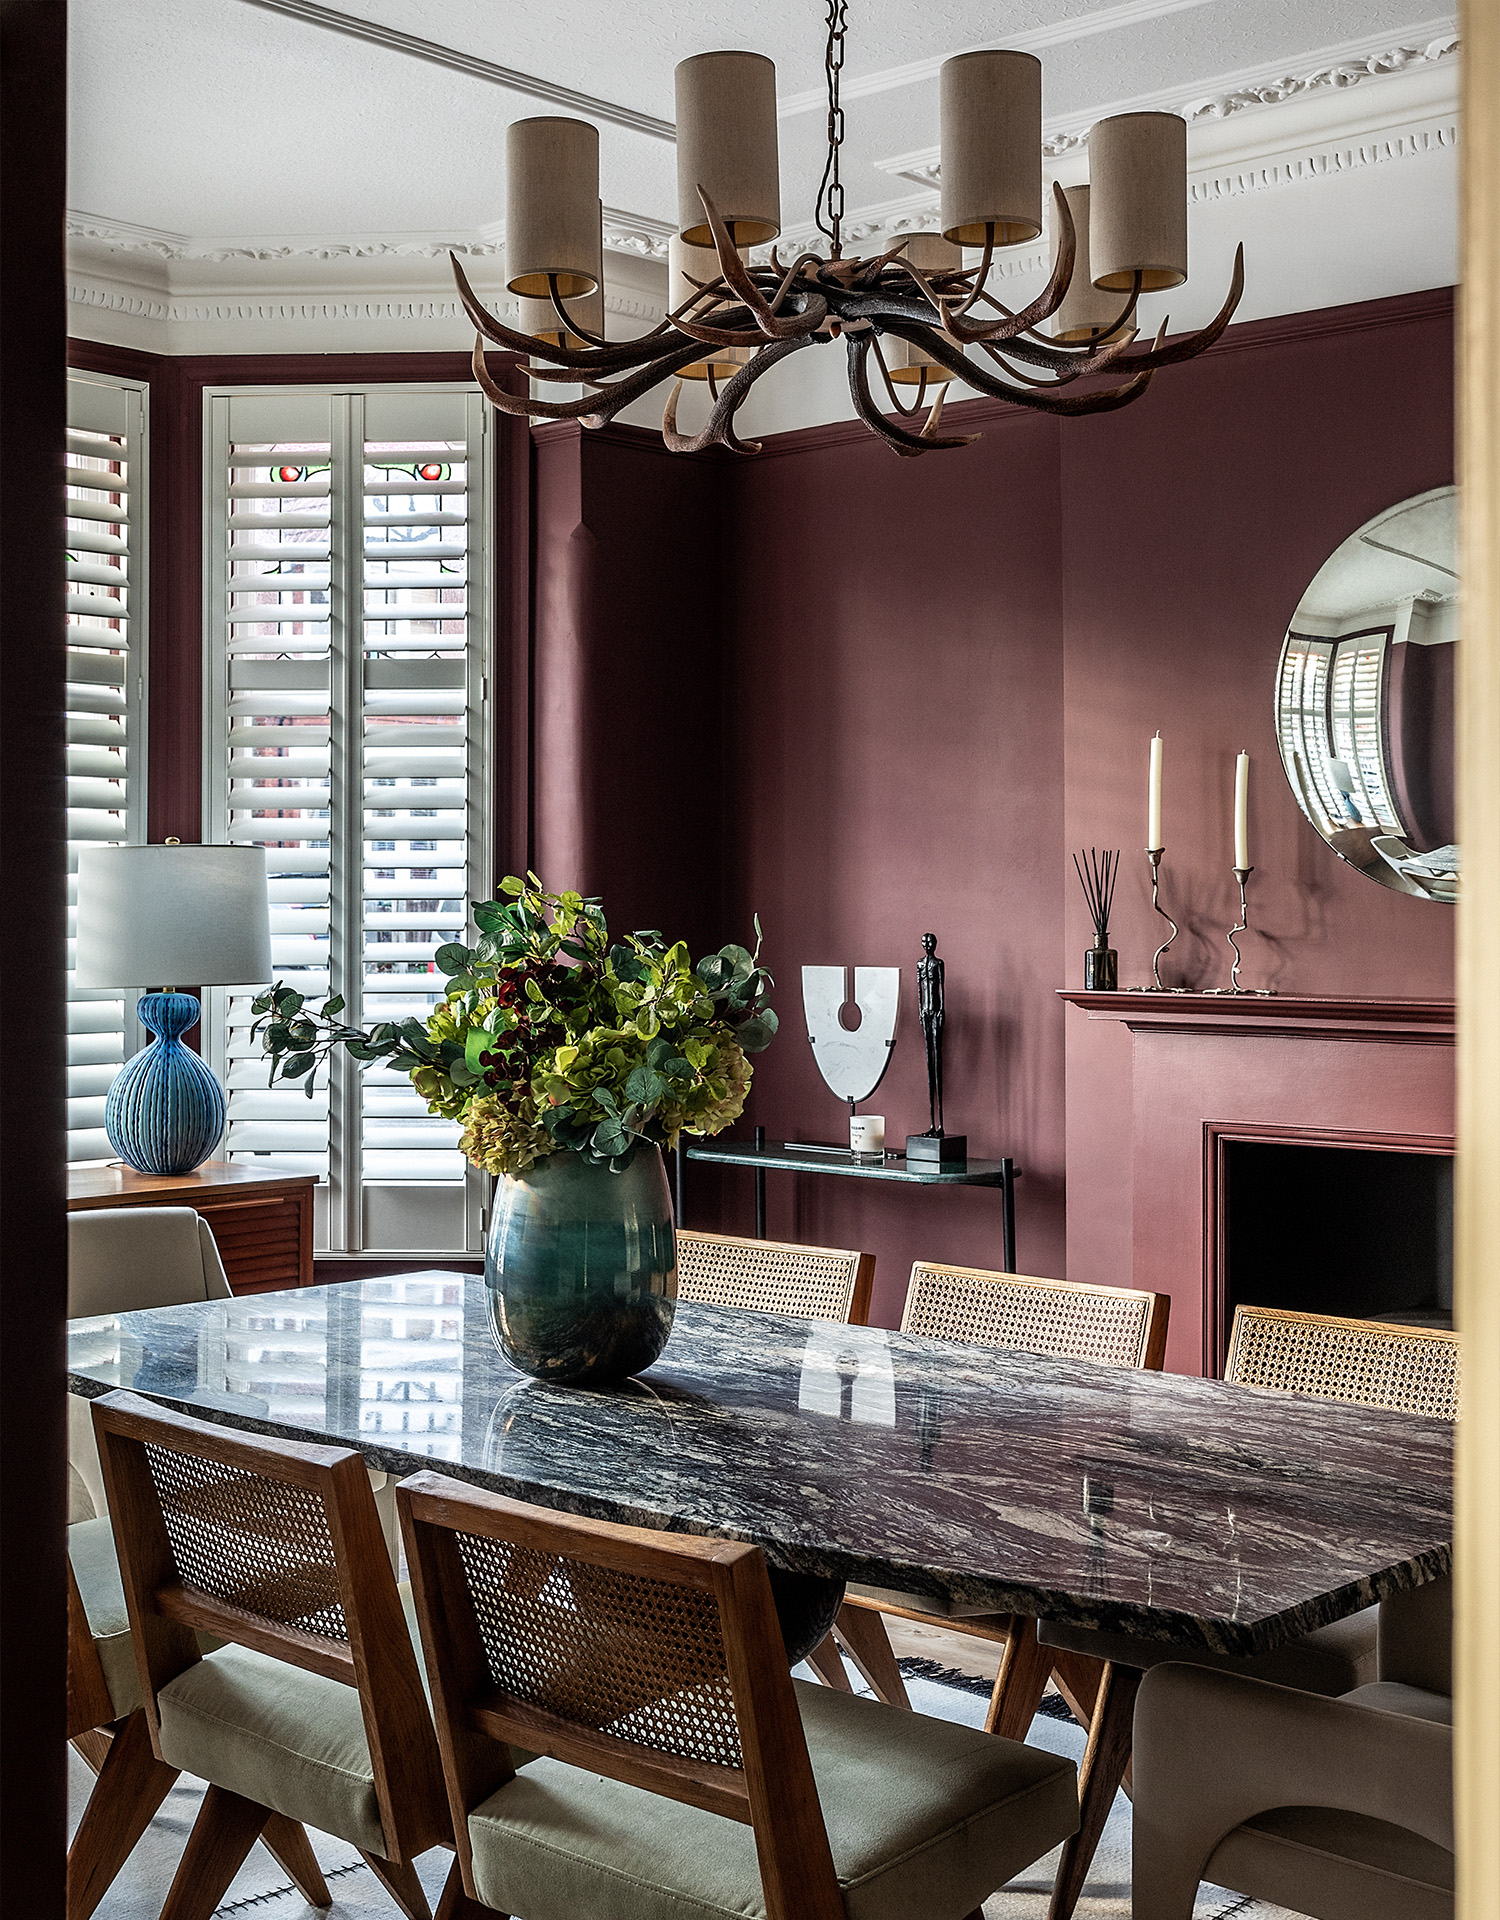 Copley Park | Dining Room | Angel O'Donnell